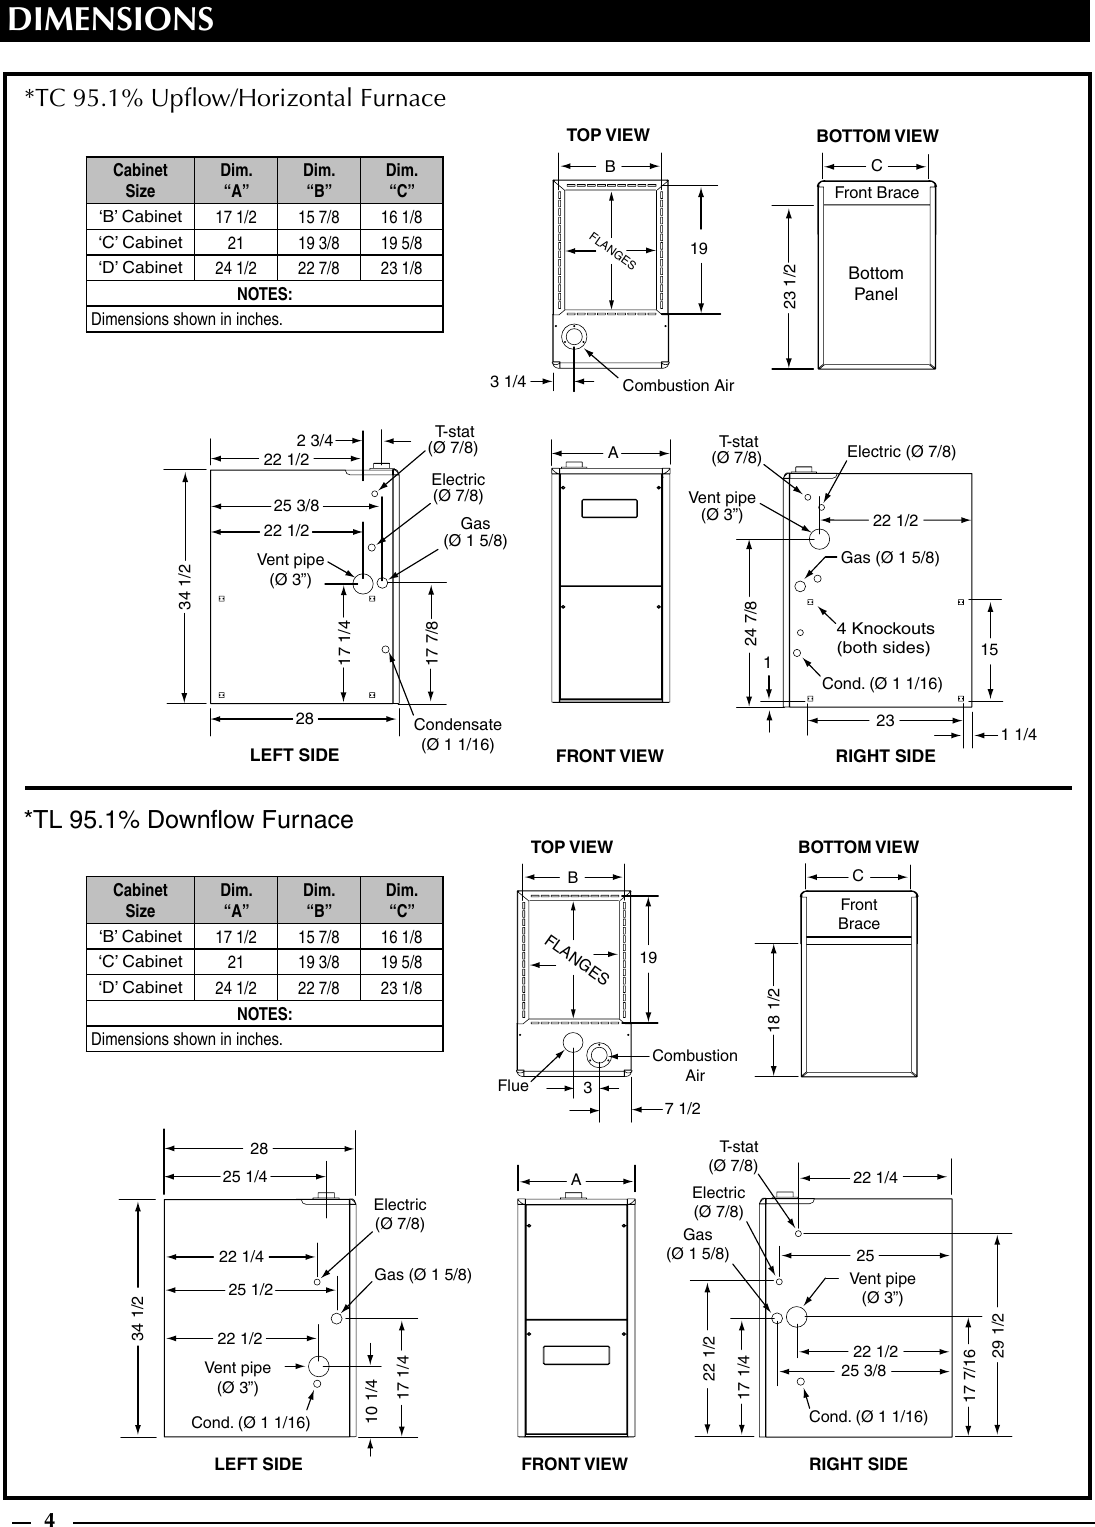 Page 4 of 8 - Maytag Maytag-Pgc2Tc-Pgc2Tl-Maytag-M1200-95-1-Afue-Two-Stage-Fixed-Speed-Gas-Furnace-Technical-Literature- PGC2T(C,L) Series Gas Furnaces Technical Specifications  Maytag-pgc2tc-pgc2tl-maytag-m1200-95-1-afue-two-stage-fixed-speed-gas-furnace-technical-literature